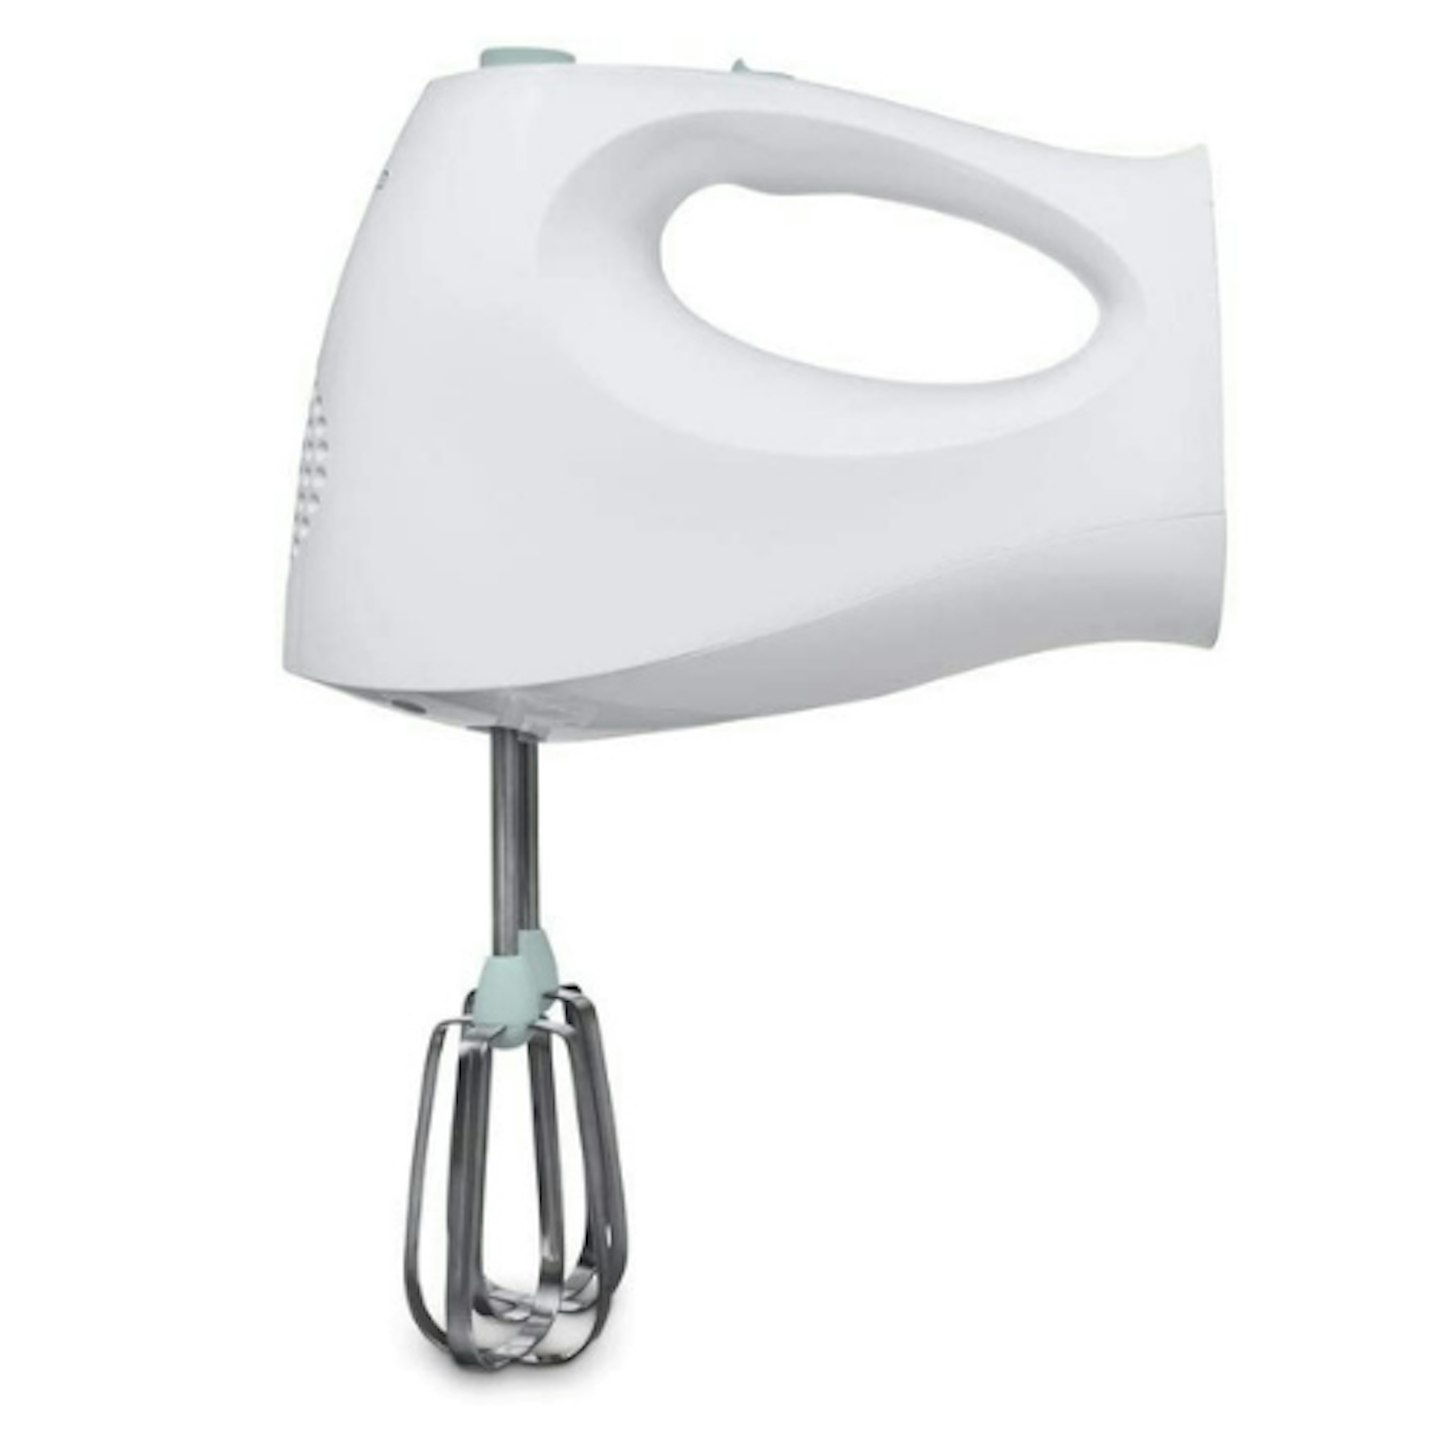 Kenwood Hand Mixer Electric Whisk on a white background.